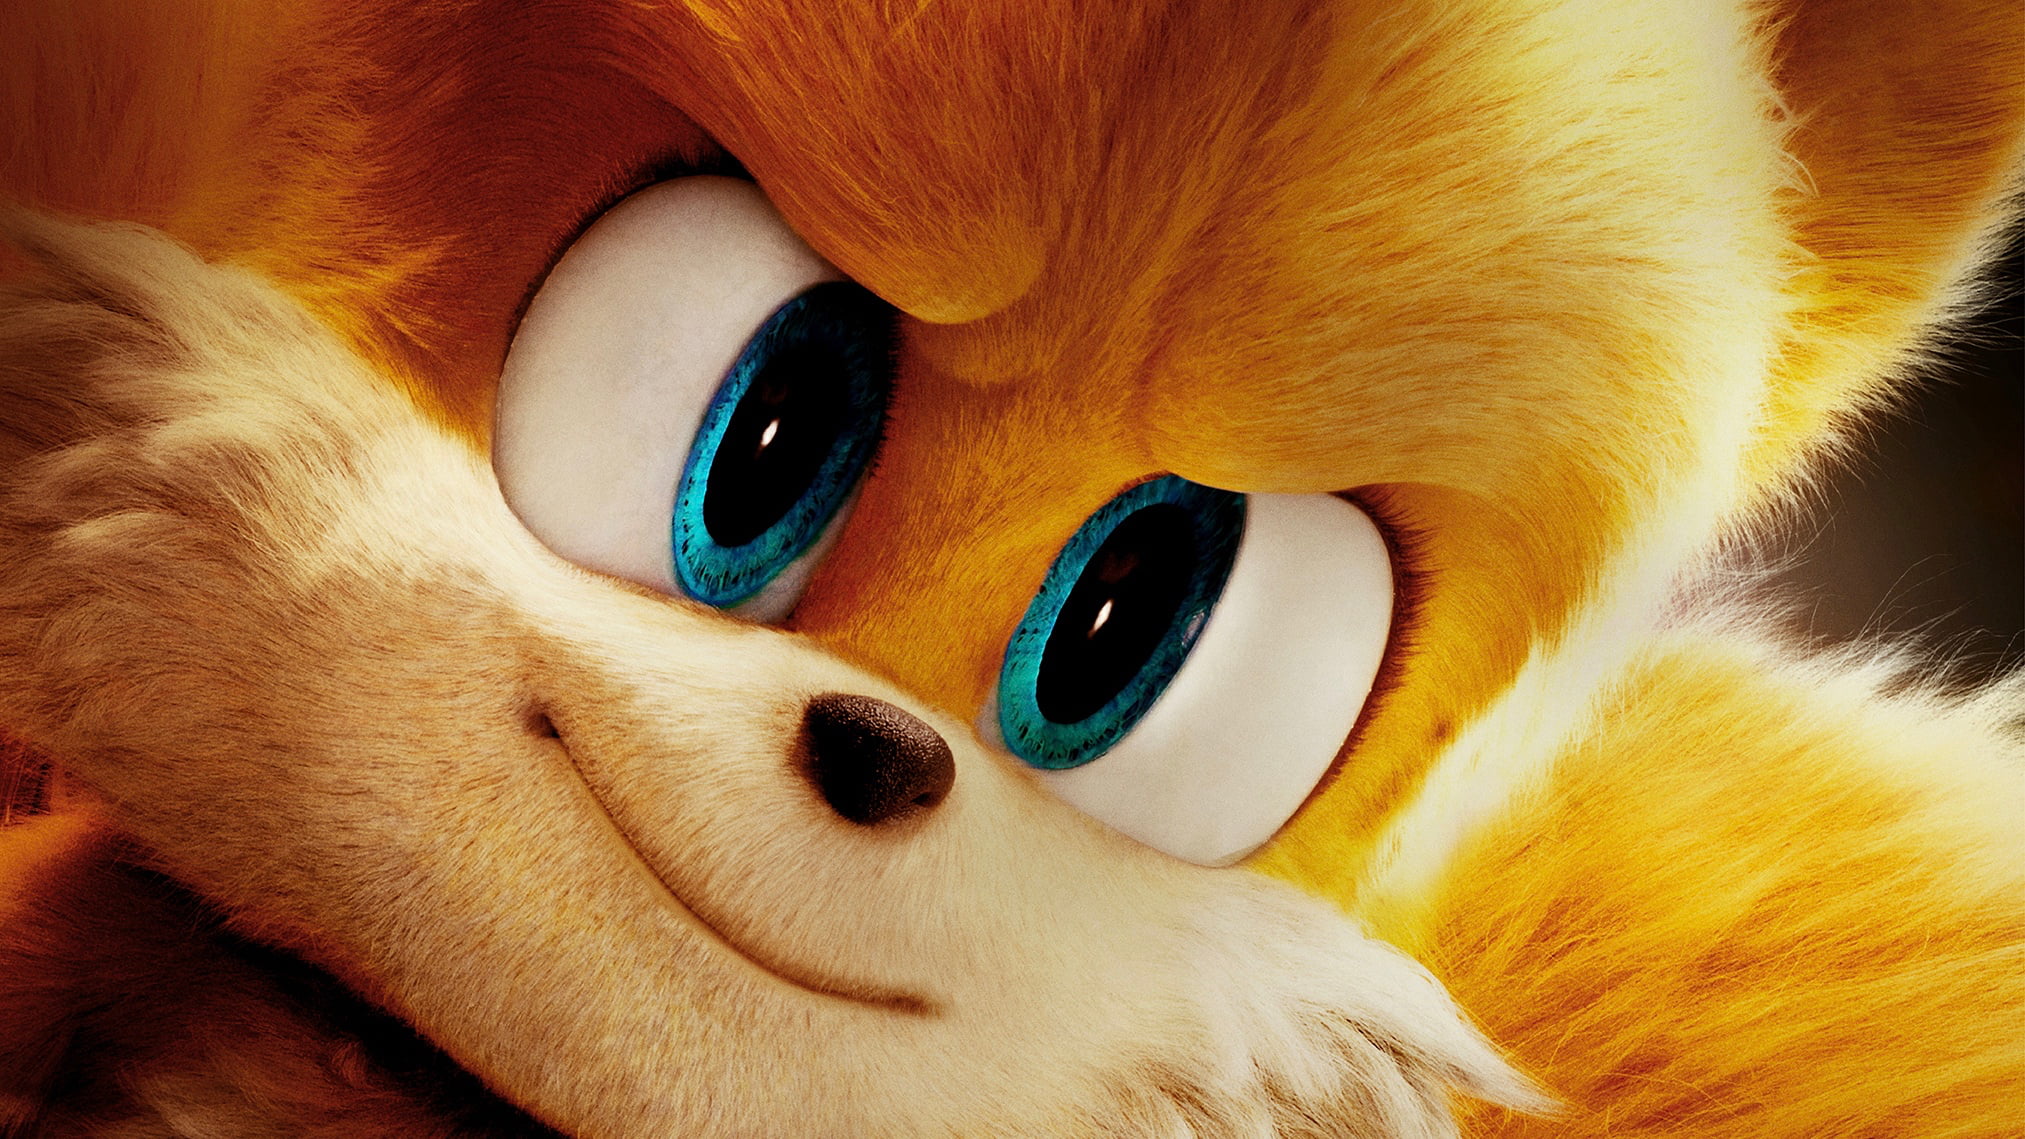 Sonic 2 The Movie, Sonic the Hedgehog, Paramount, Sega, Tails (character)